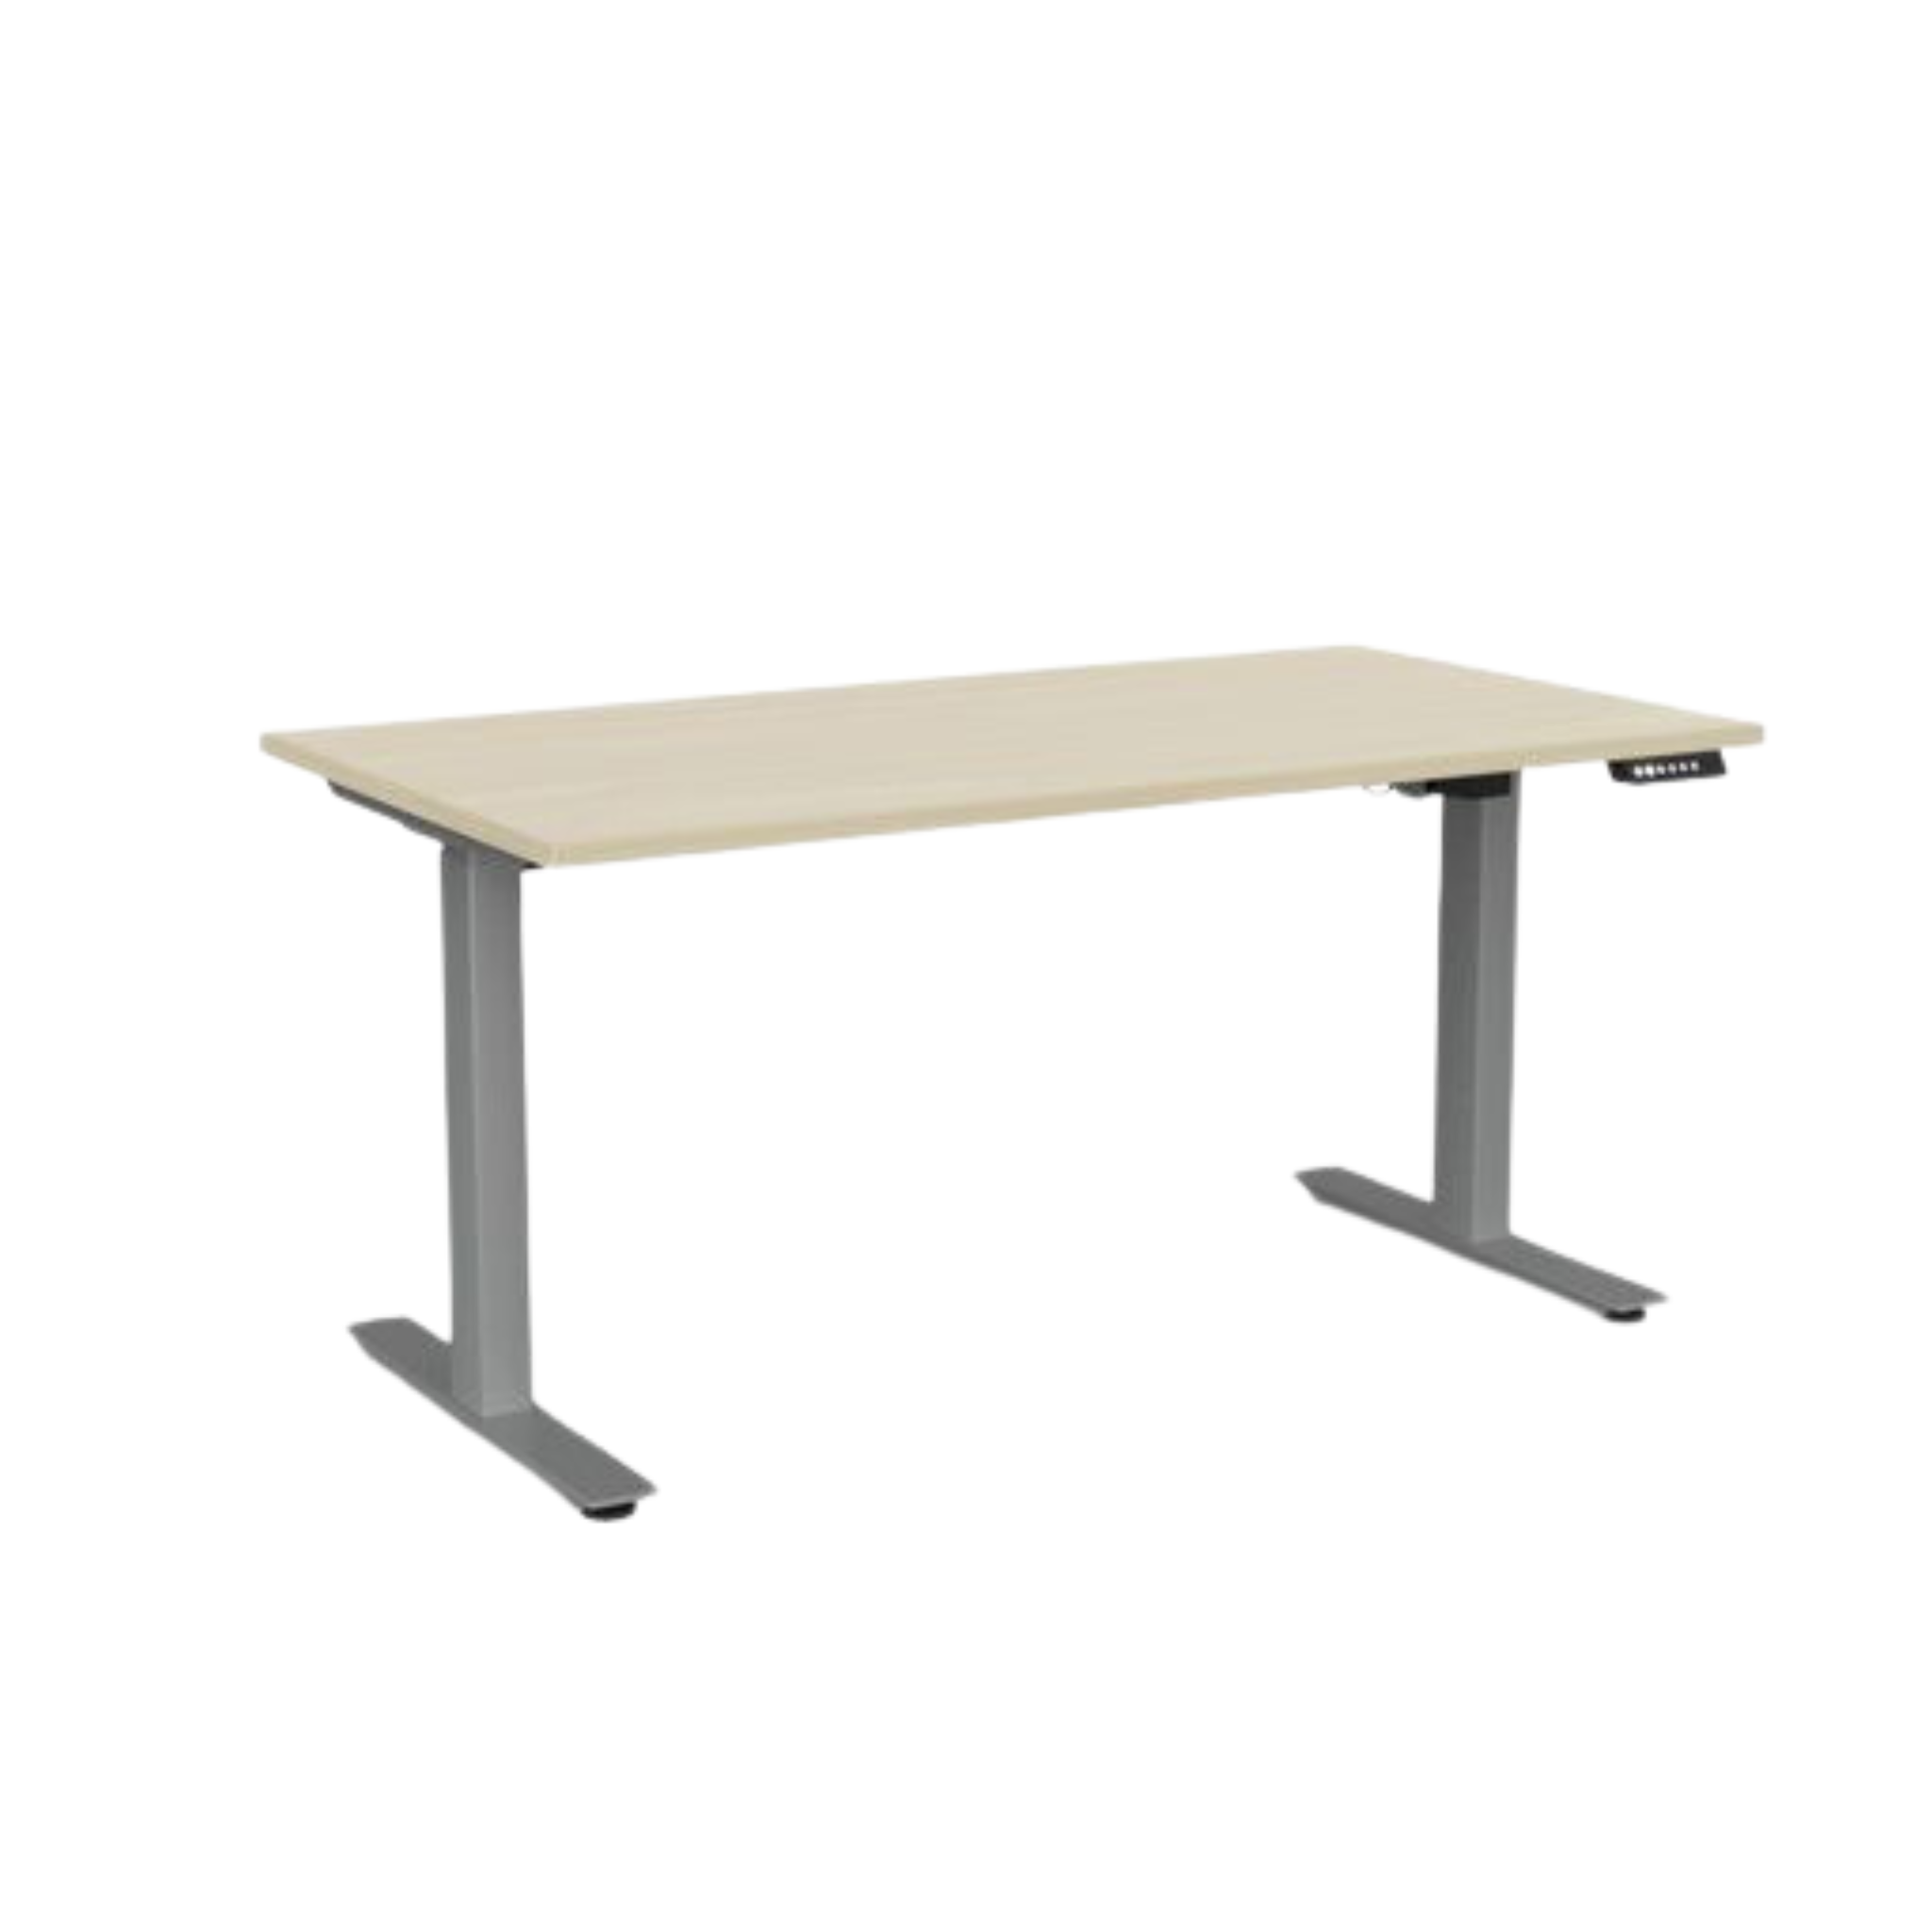 Agile 2 electric sit to stand desk with silver frame and nordic maple top